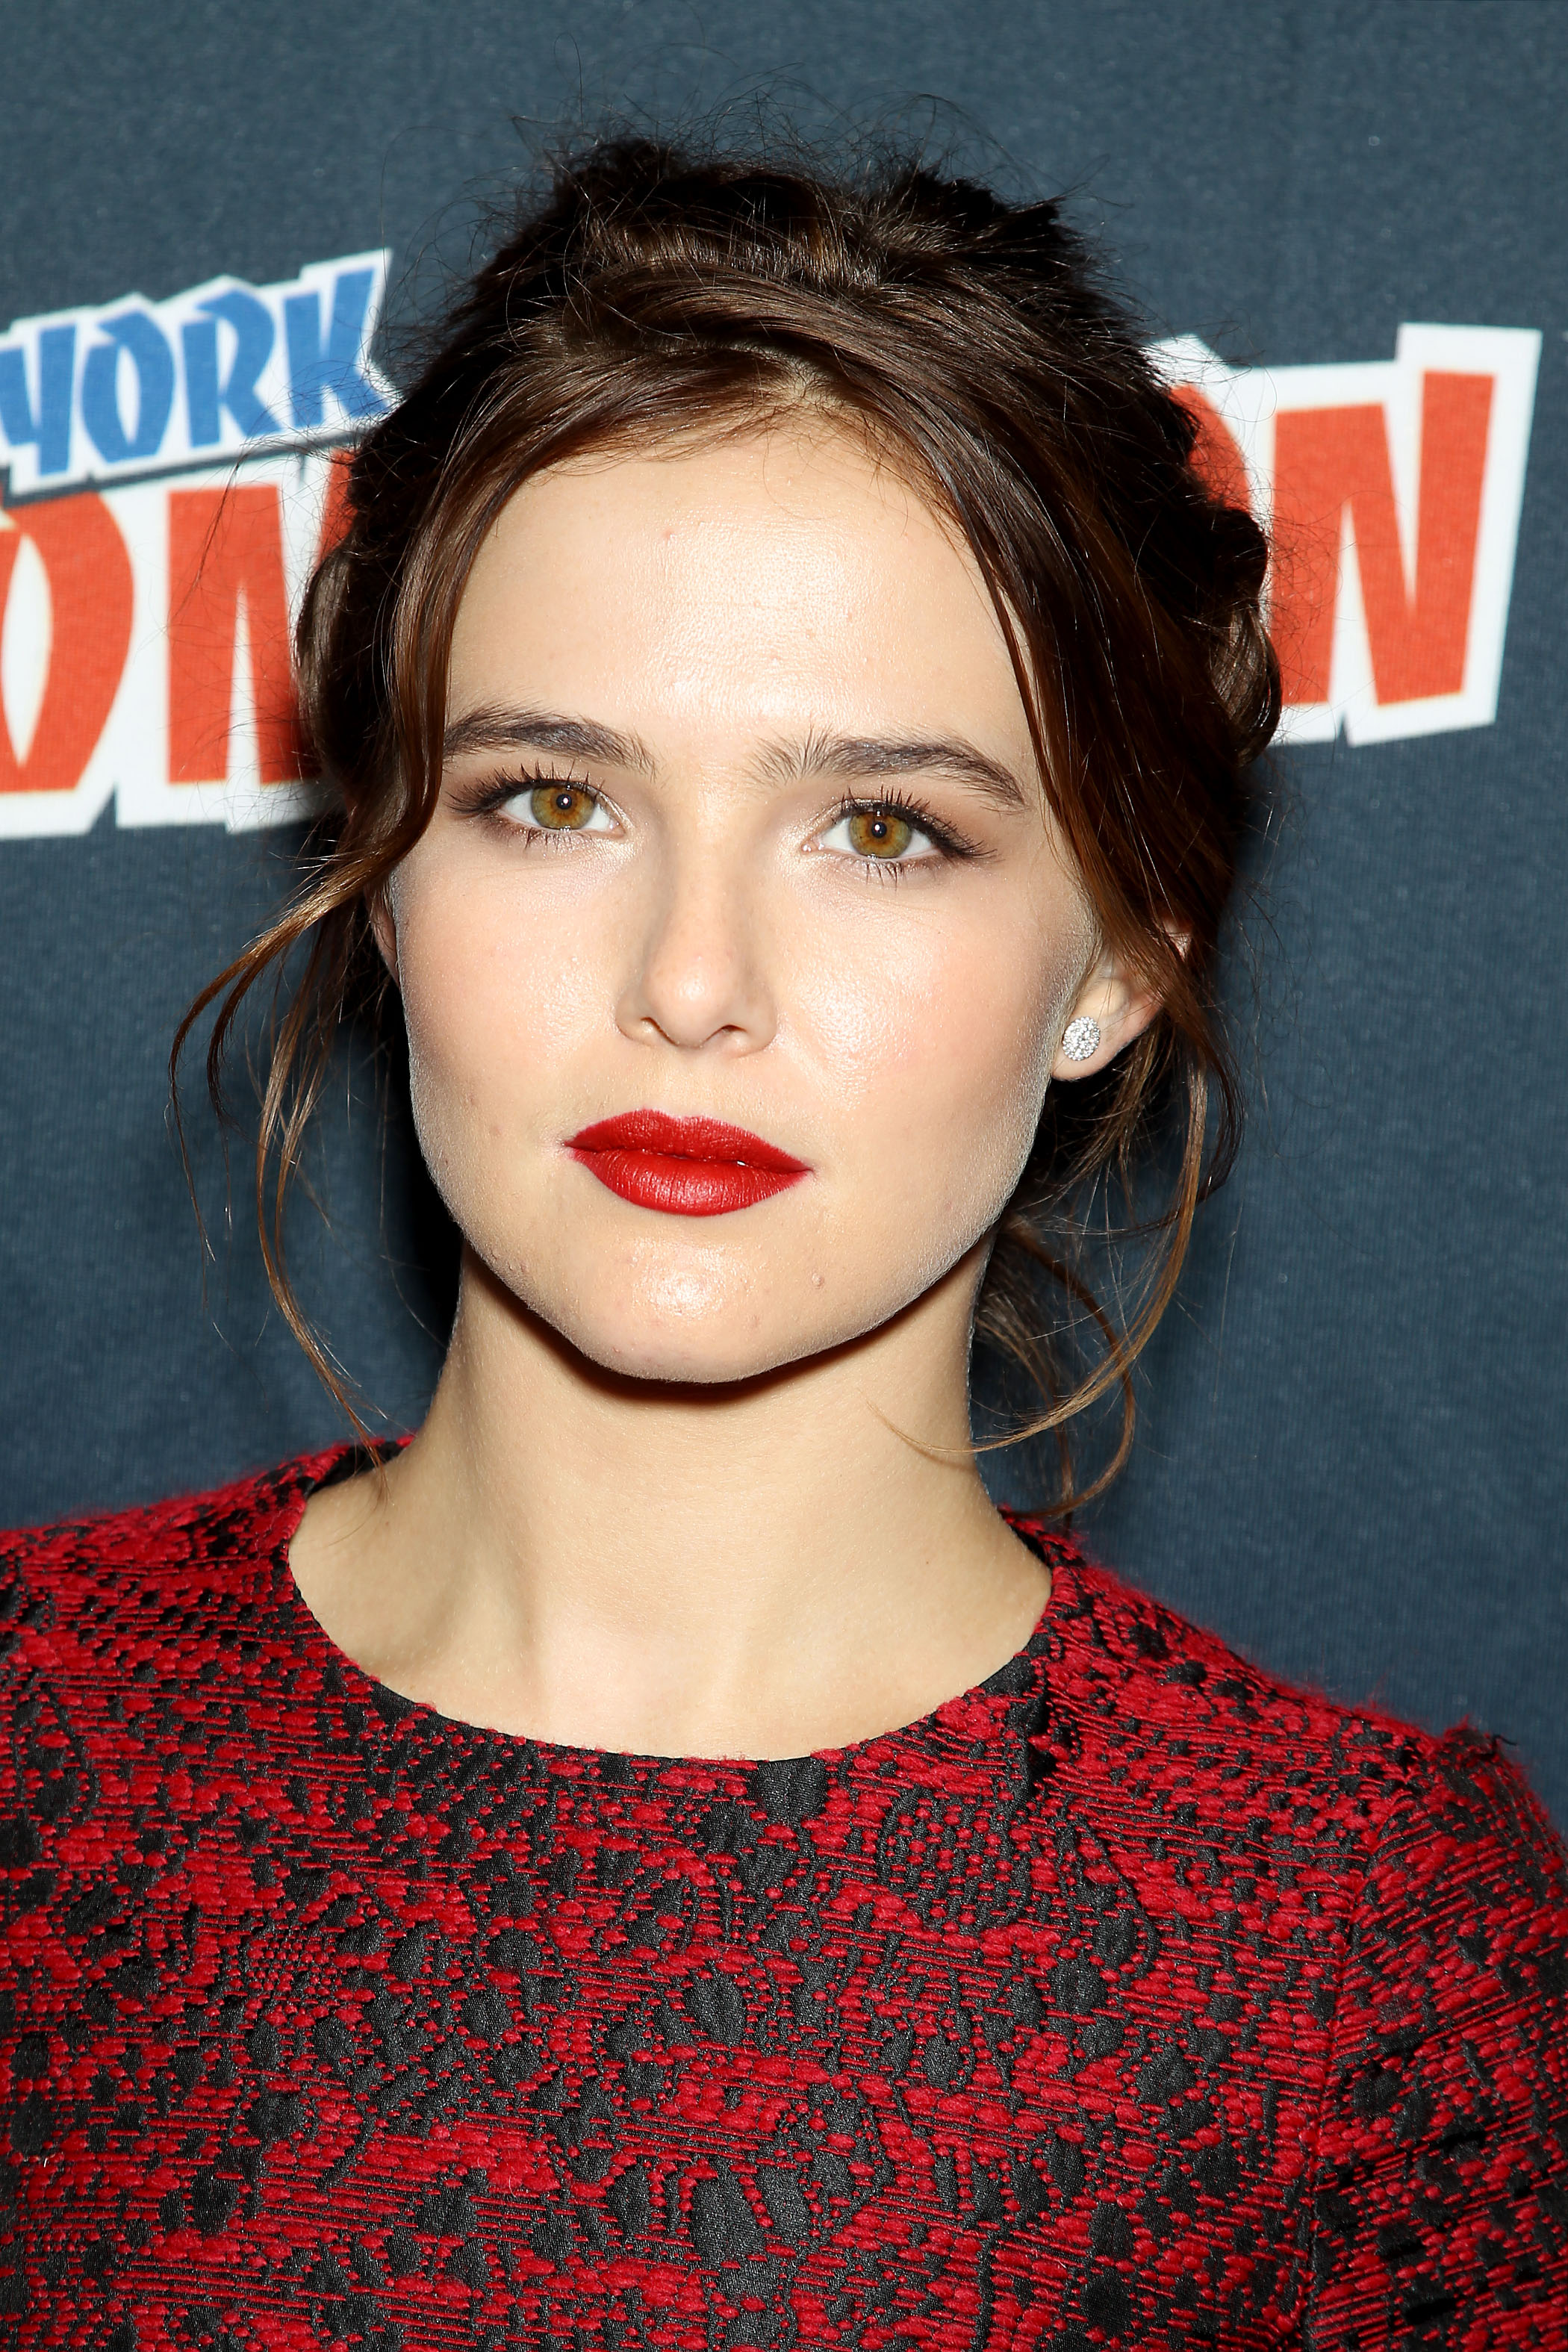 NY-Comic-Con-2013-Zoey-Deutch-the-vampire-academy-blood-sisters-35794495-2100-3150